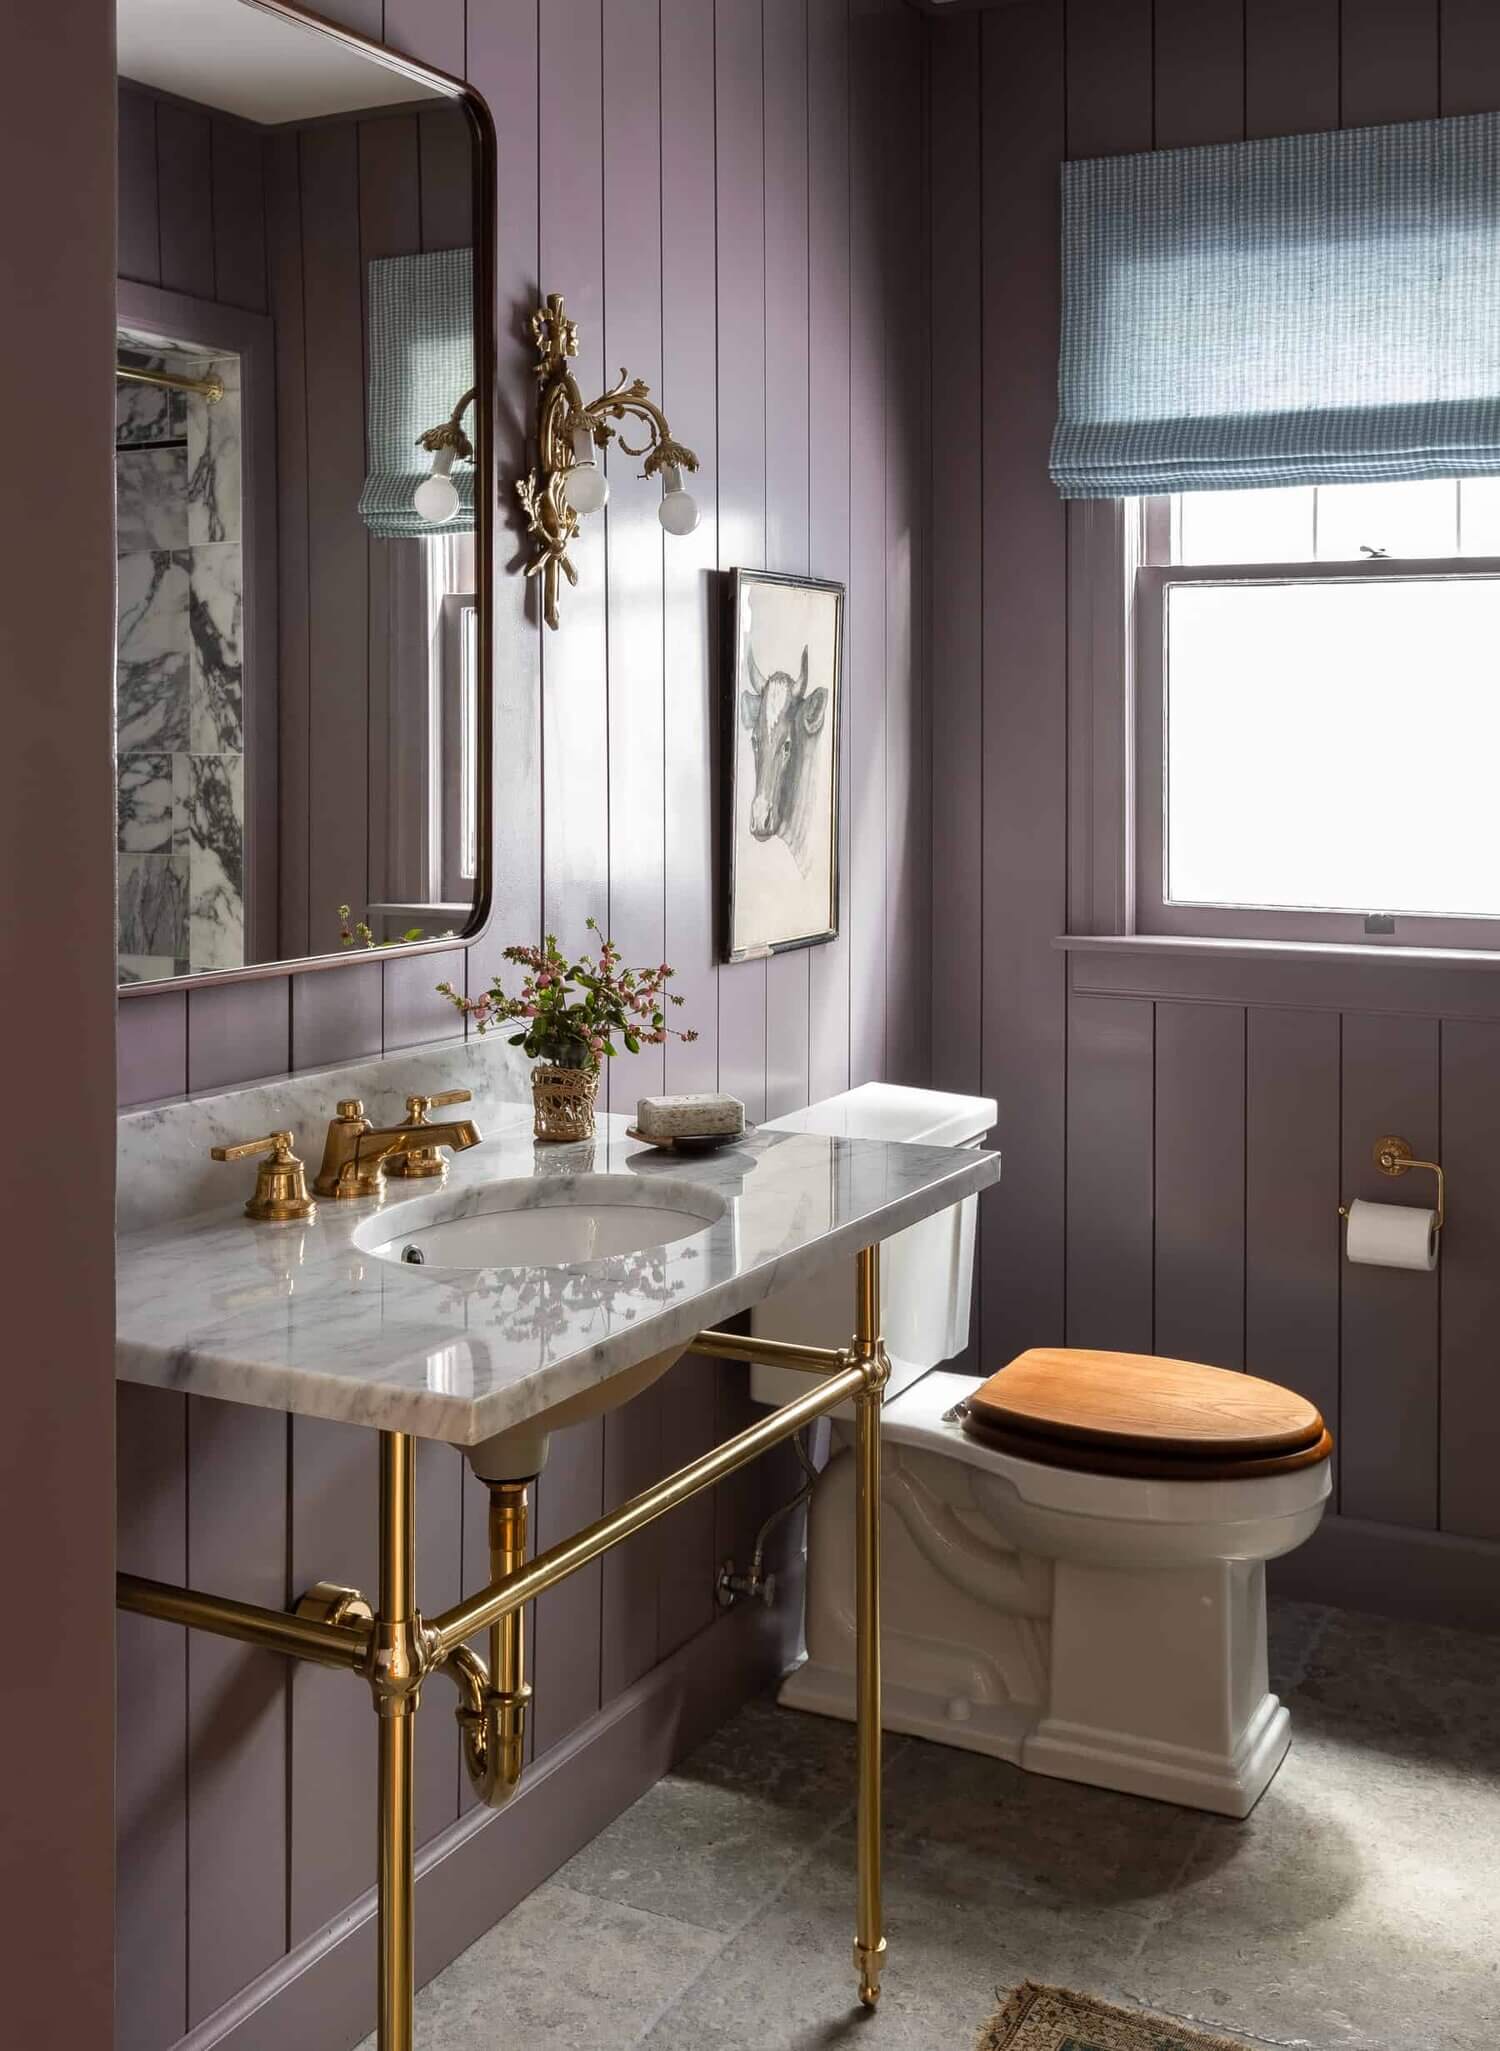 purplecladdedpowderroomwithmarblesinkindesignerHeidiCailliersWashingtonhome TheNordroom Soothing Colors in Designer Heidi Caillier's Eclectic Washington Home